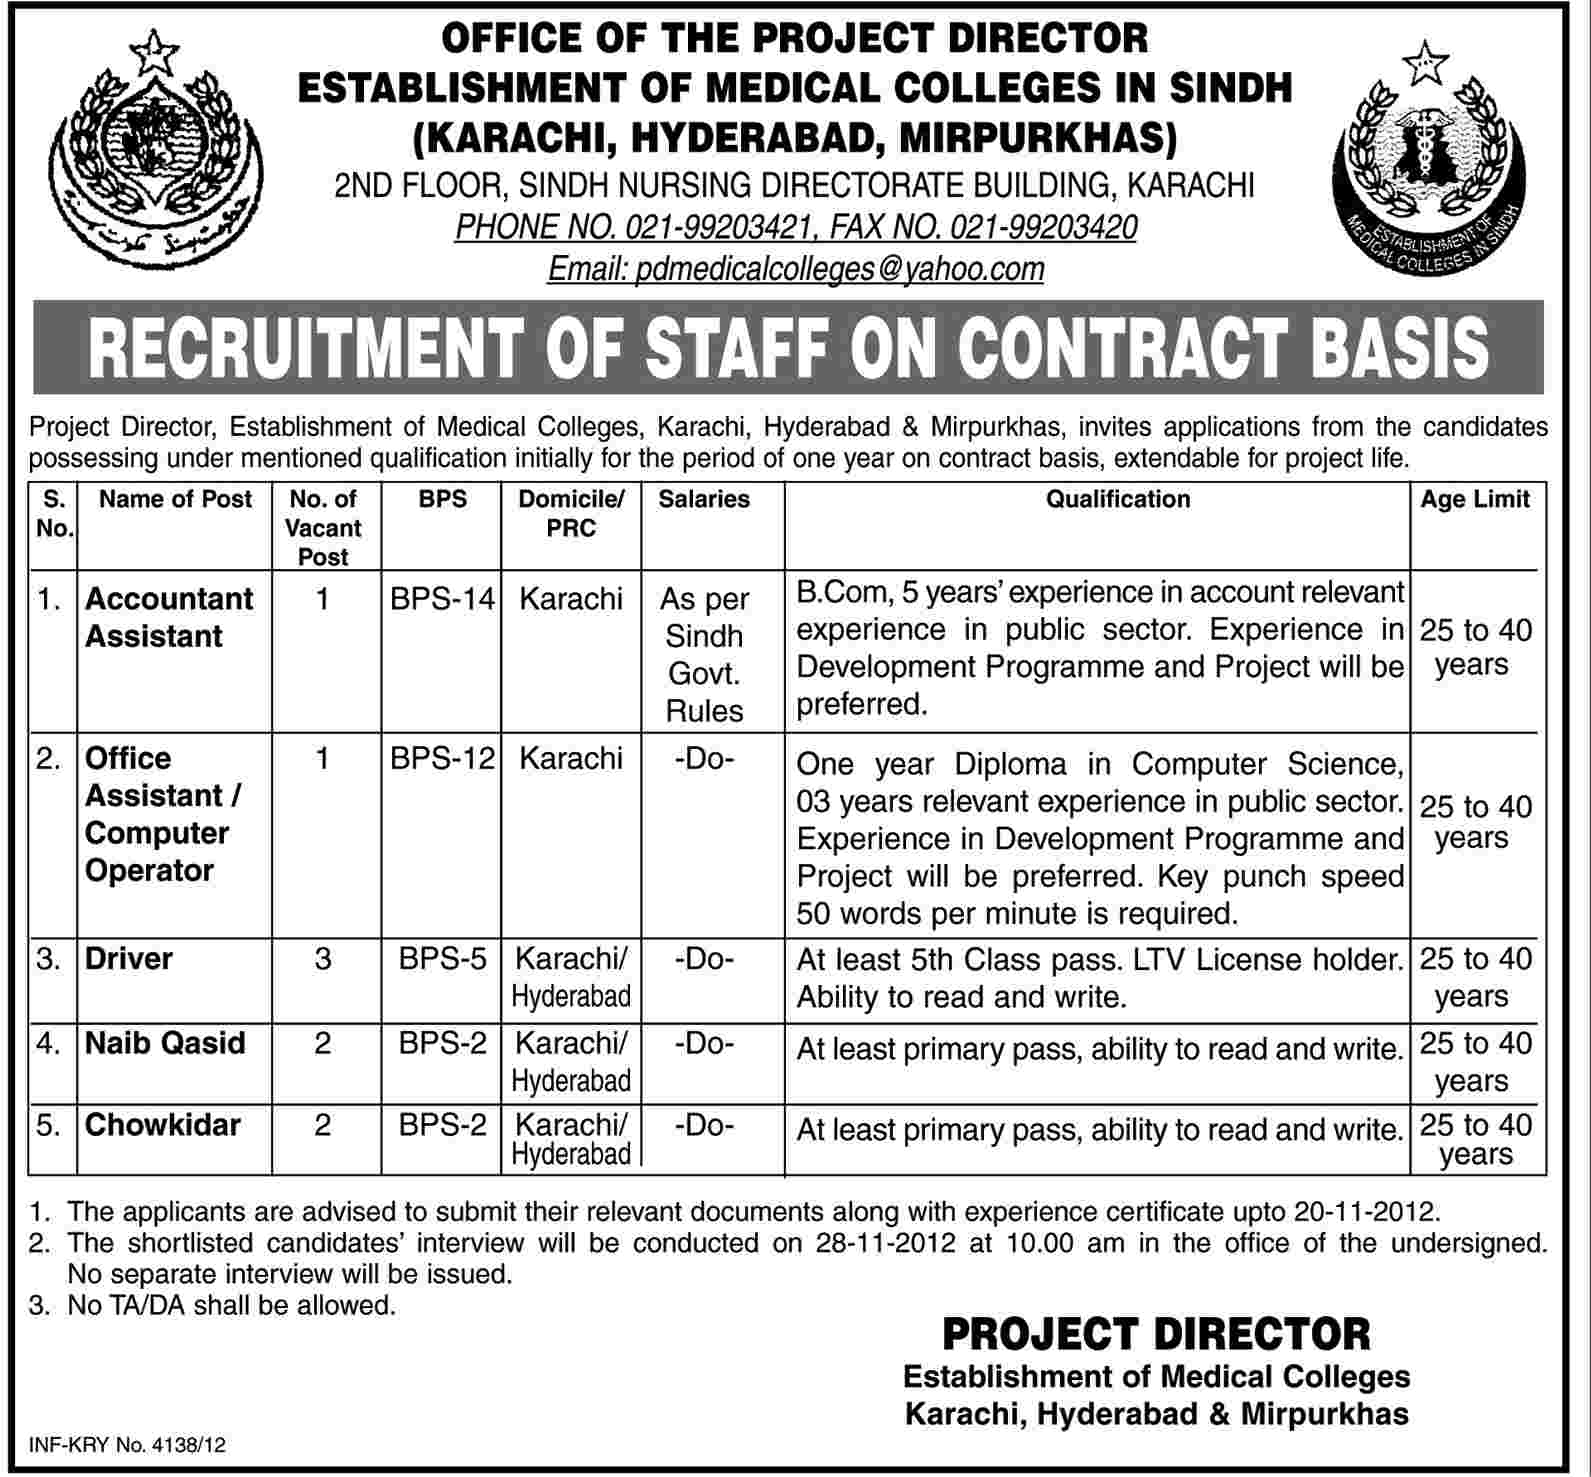 Office of the Project Director, Establishment of Medical Colleges in Sindh Jobs